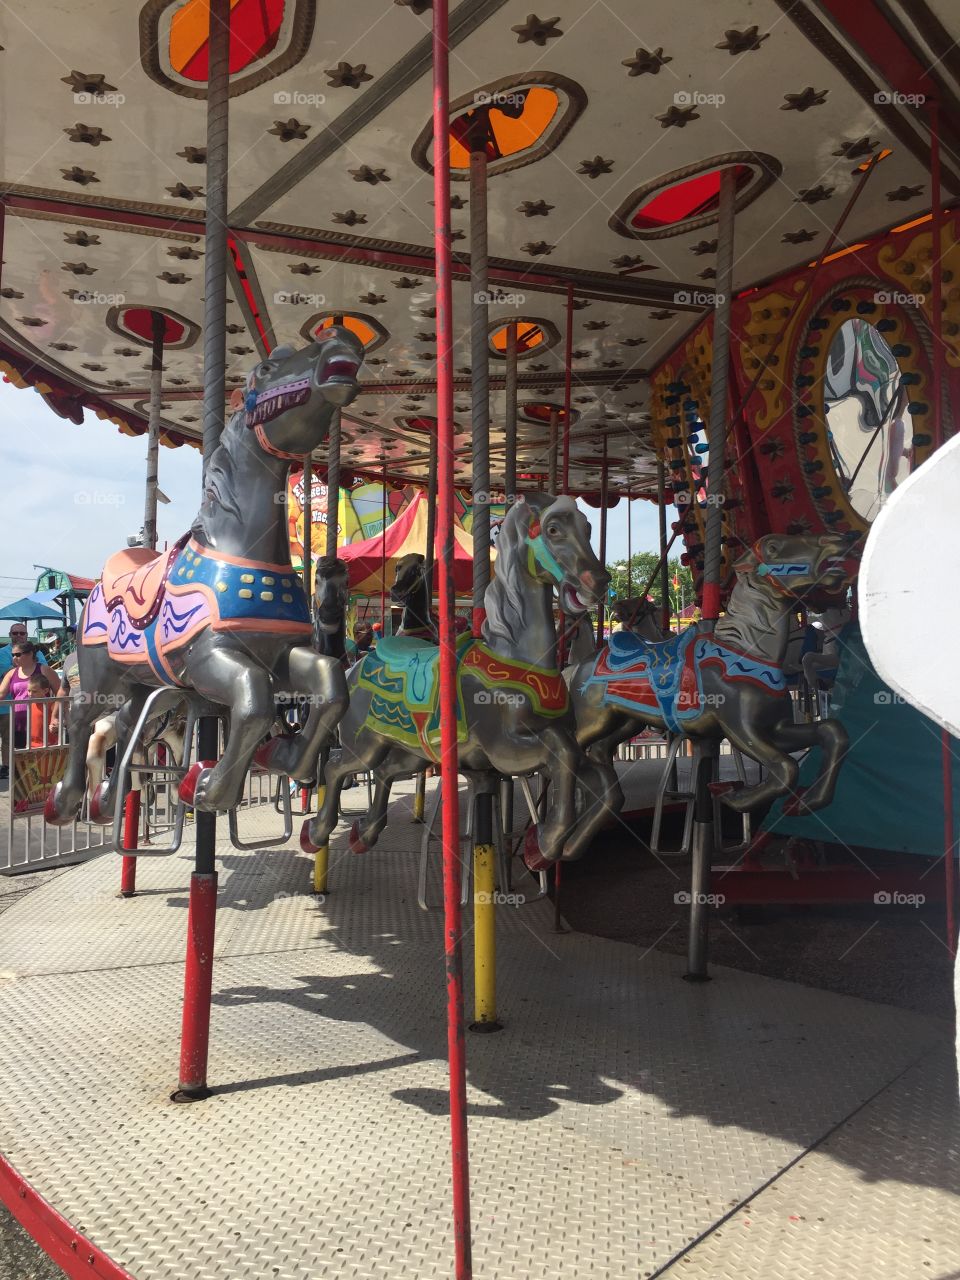 Line of colorful carousel horses at fair